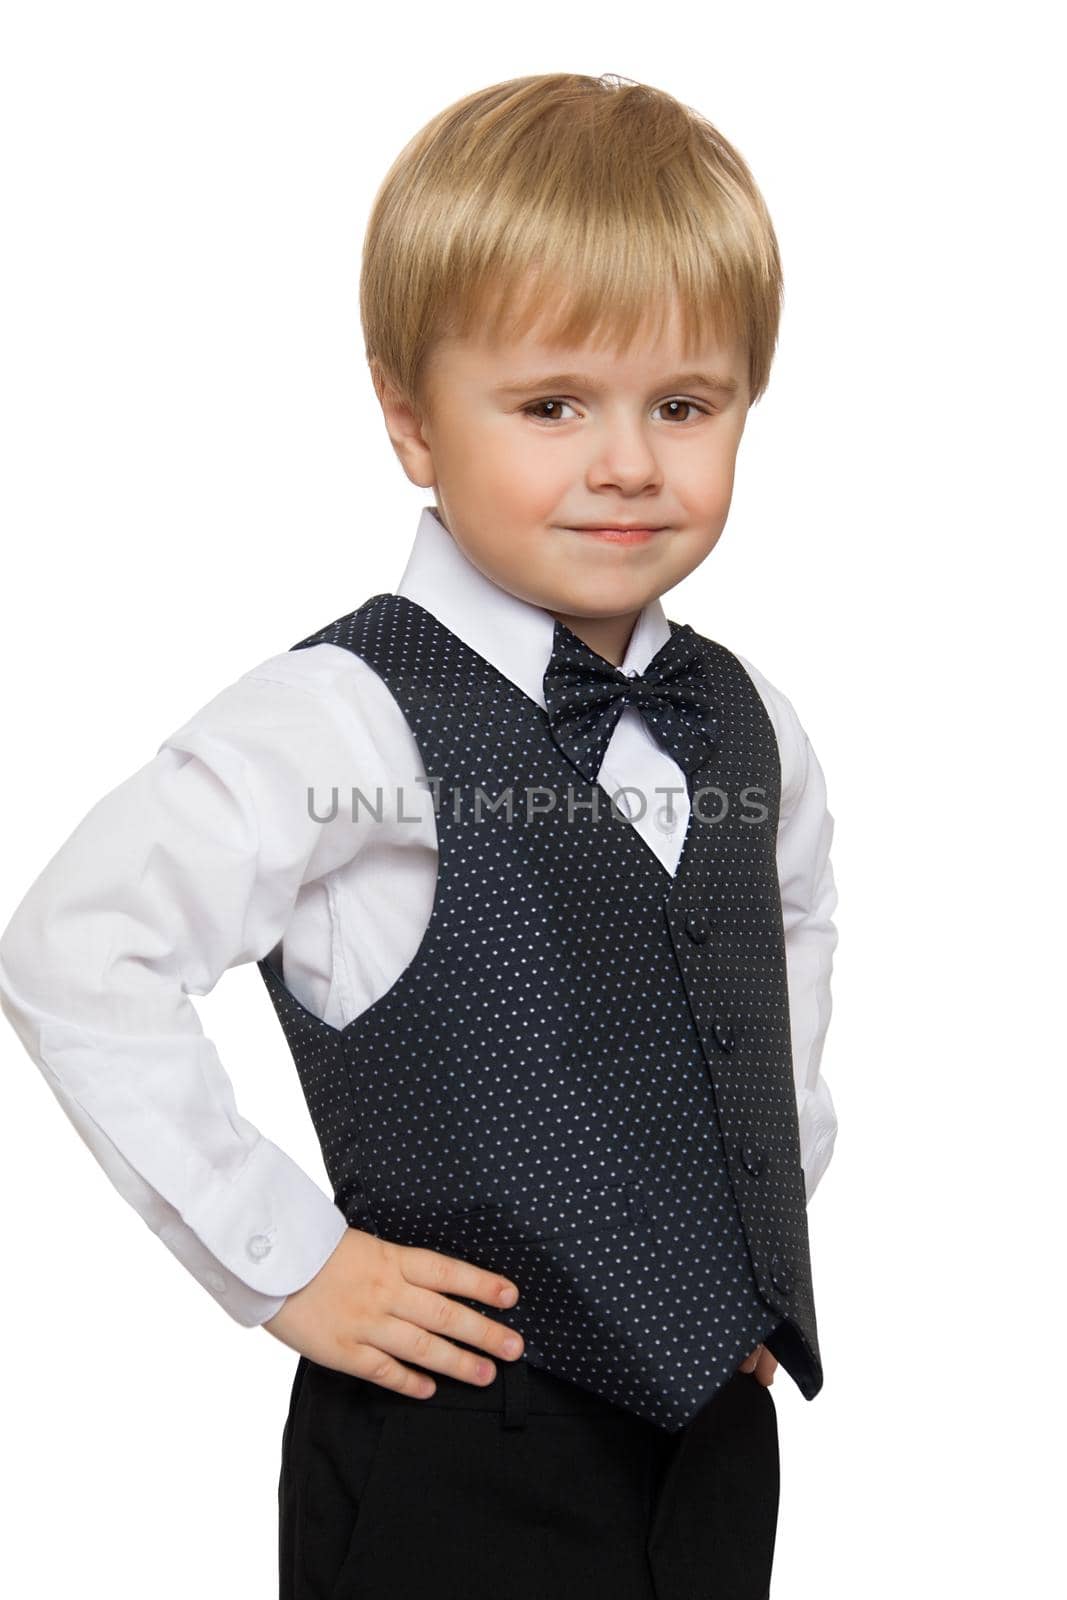 Cute little boy in white shirt, vest and tie , turned the camera sideways - Isolated on white background